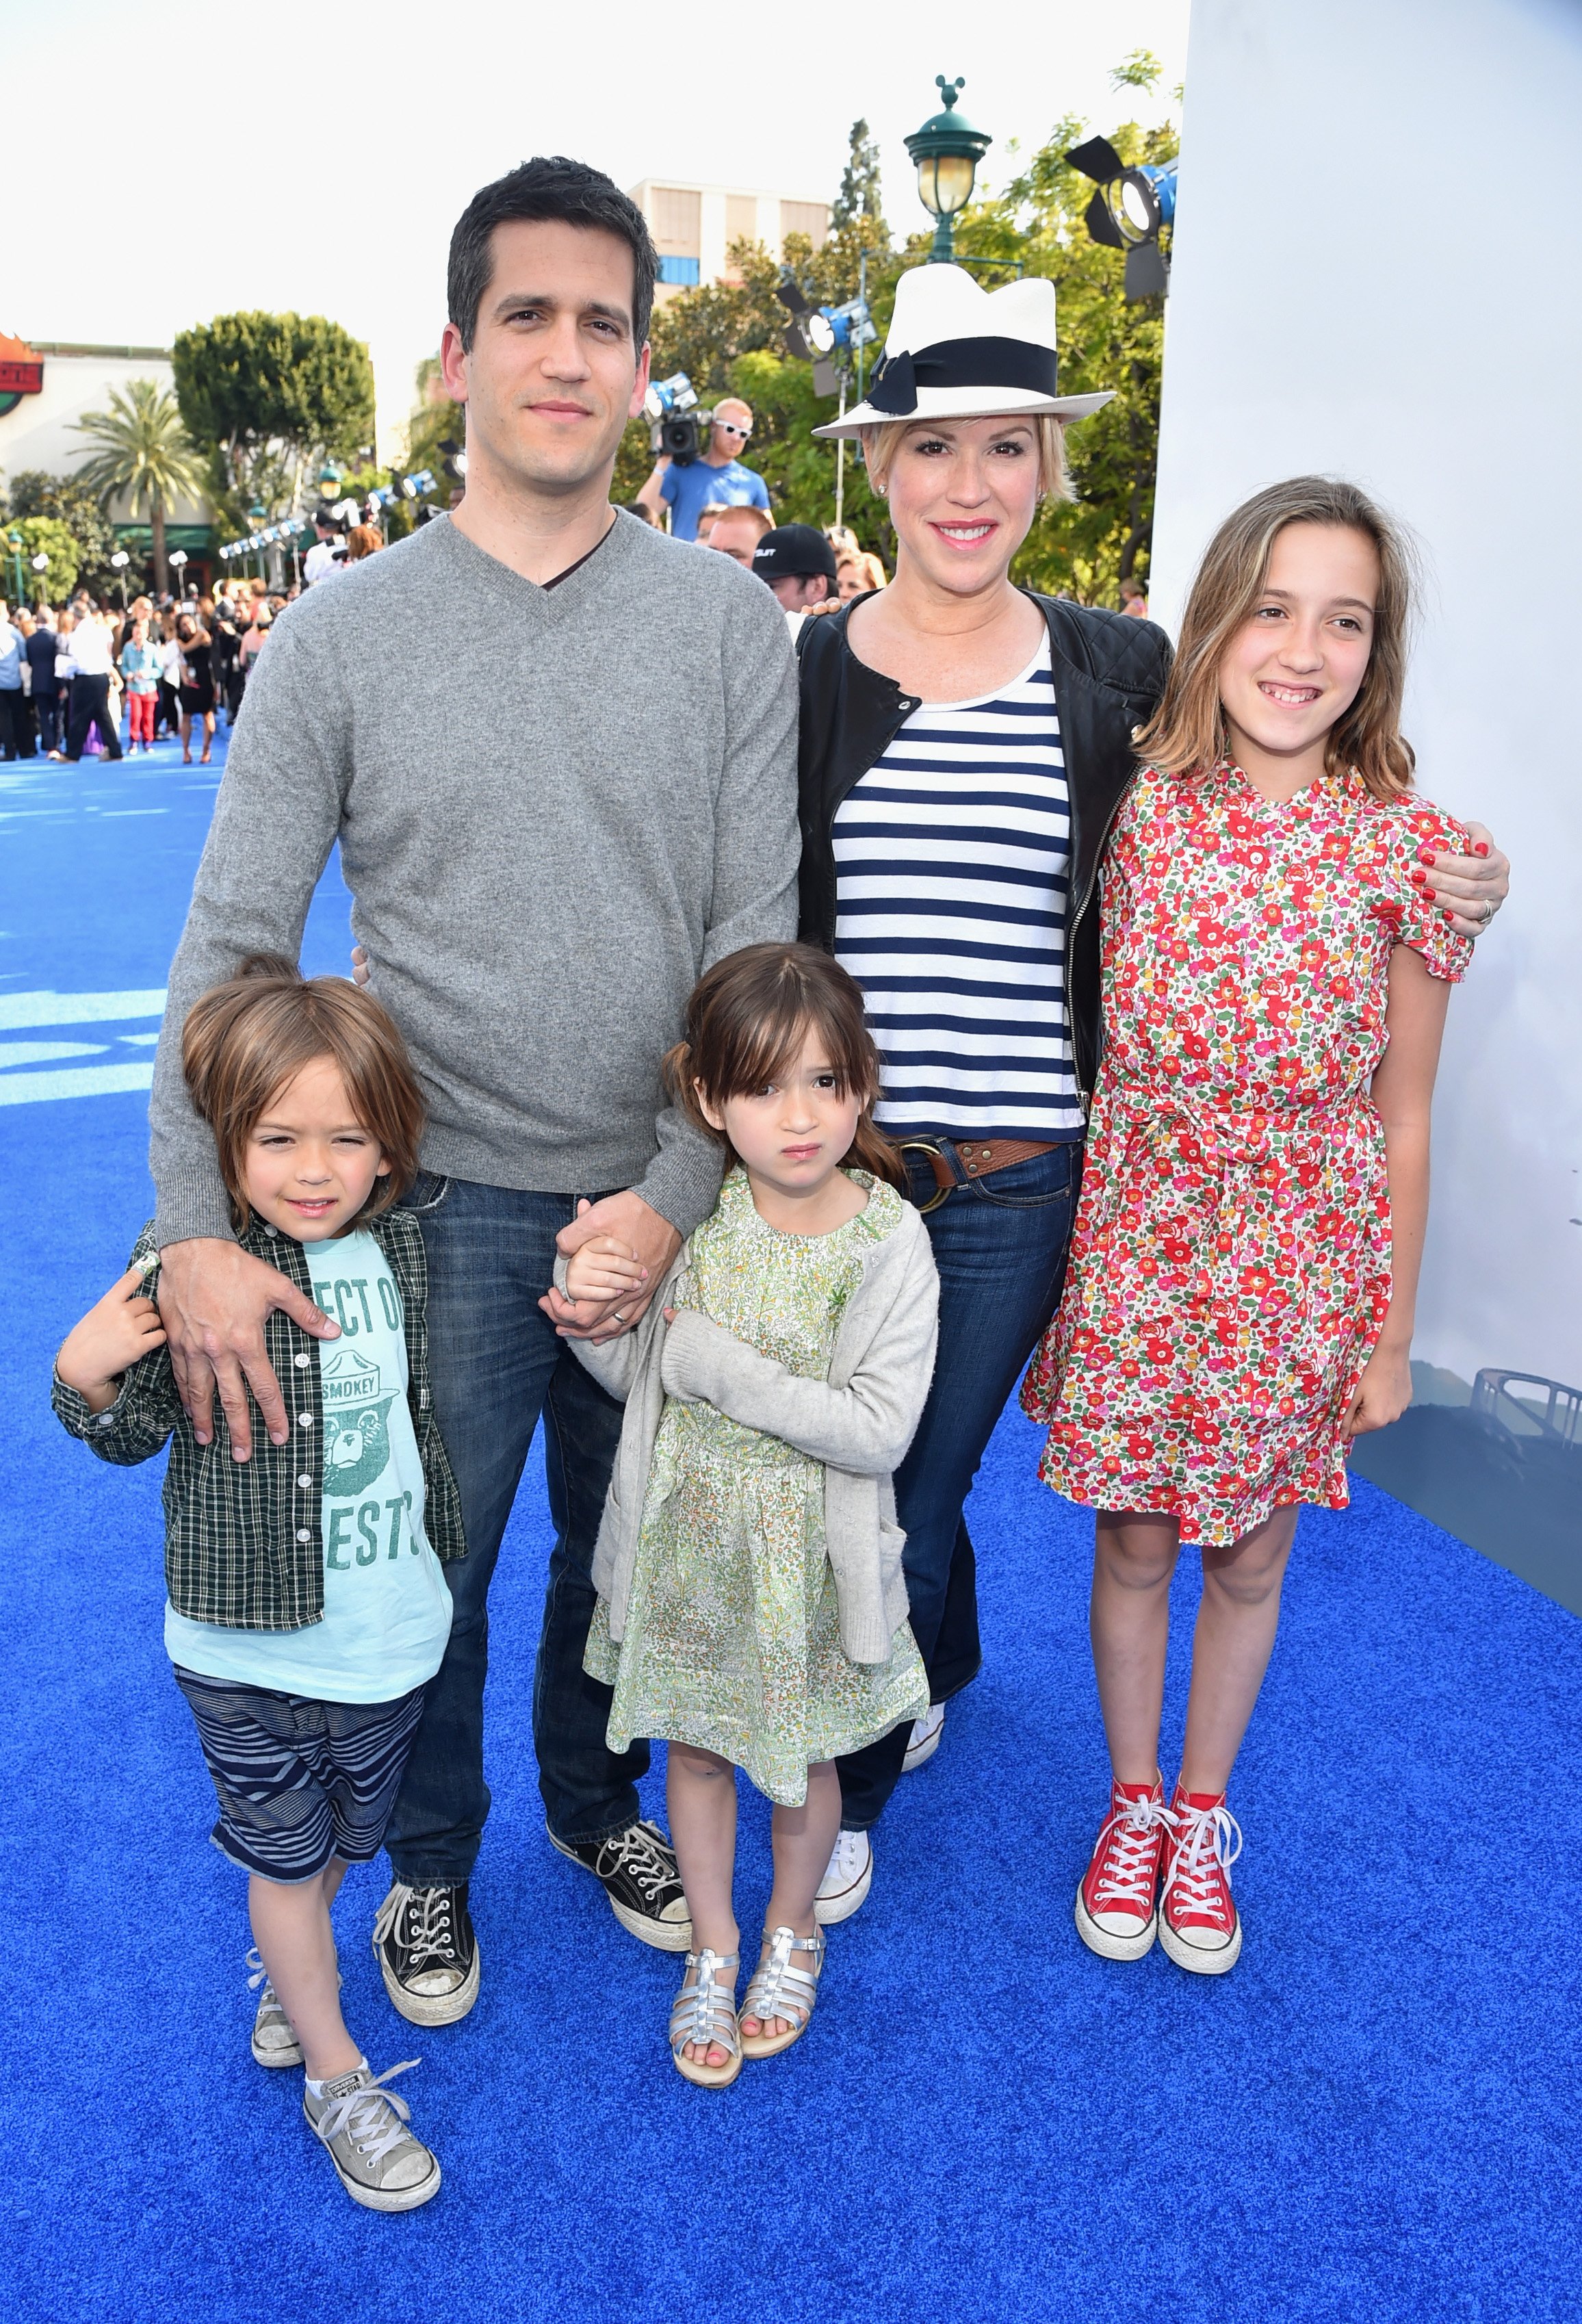 Panio, Adele, Roman and Mathilda Gianopoulos, and Molly Ringwald at the world premiere of Disney's "Tomorrowland" on May 9, 2015, in California. | Source: Getty Images